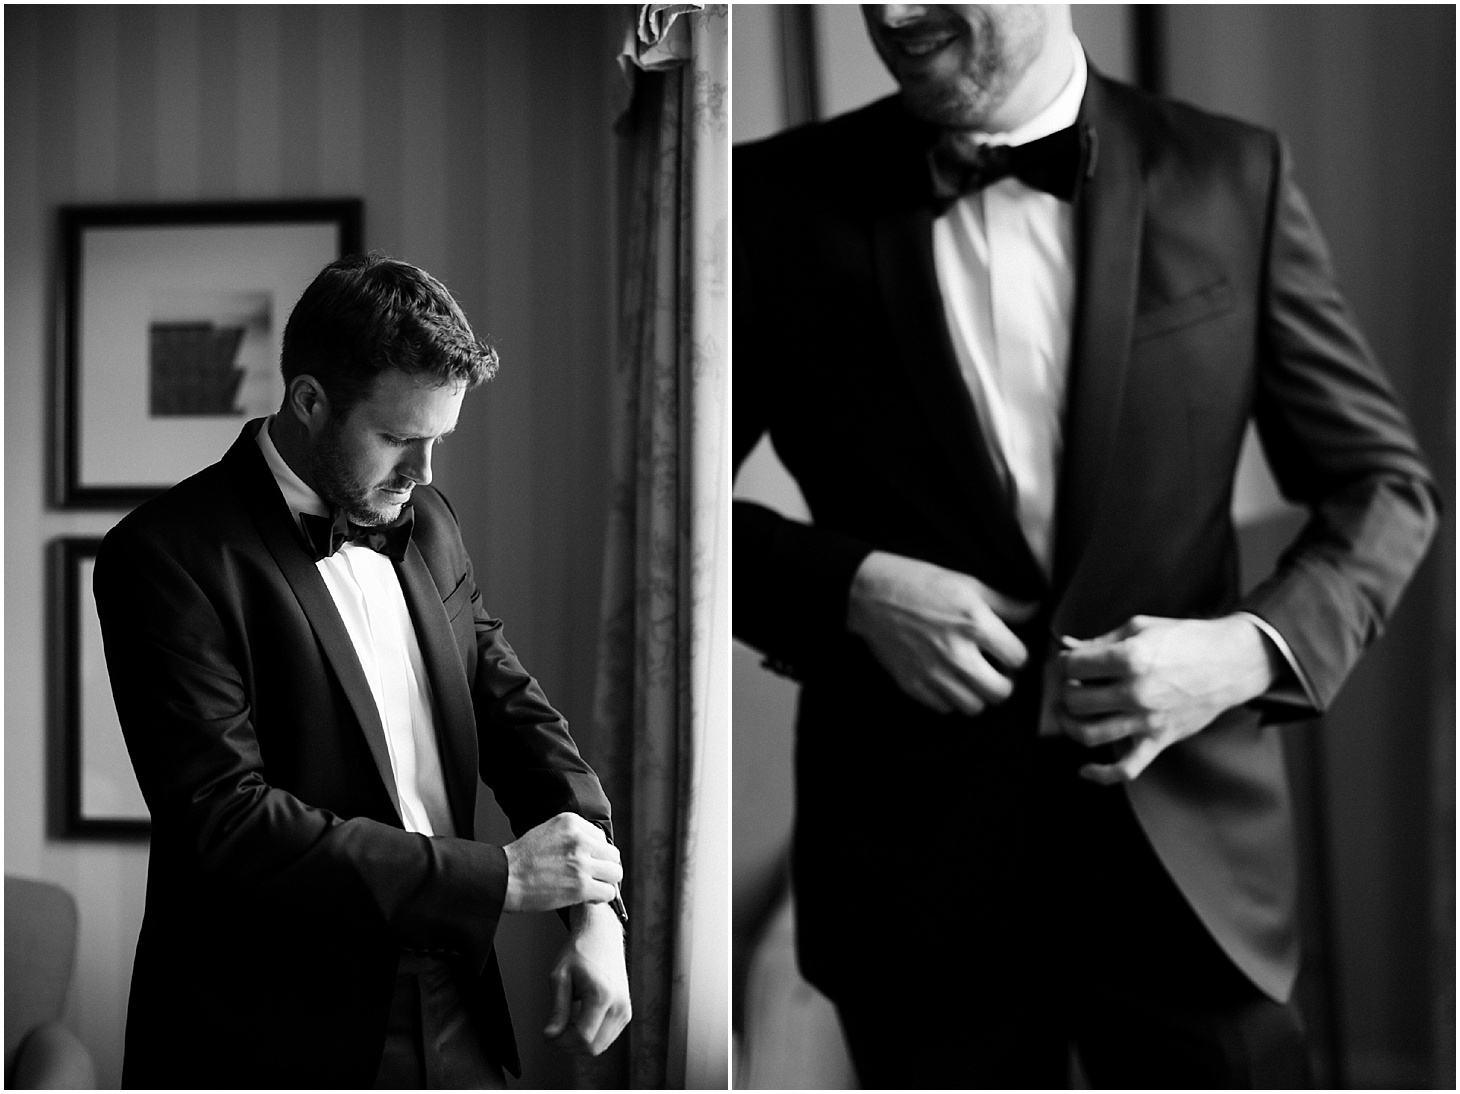 Groom Getting Ready at Hay-Adams Hotel in Washington,DC | French-Inspired New Years Eve Wedding at the Decatur House | Sarah Bradshaw Photography | Washington DC Wedding Photographer